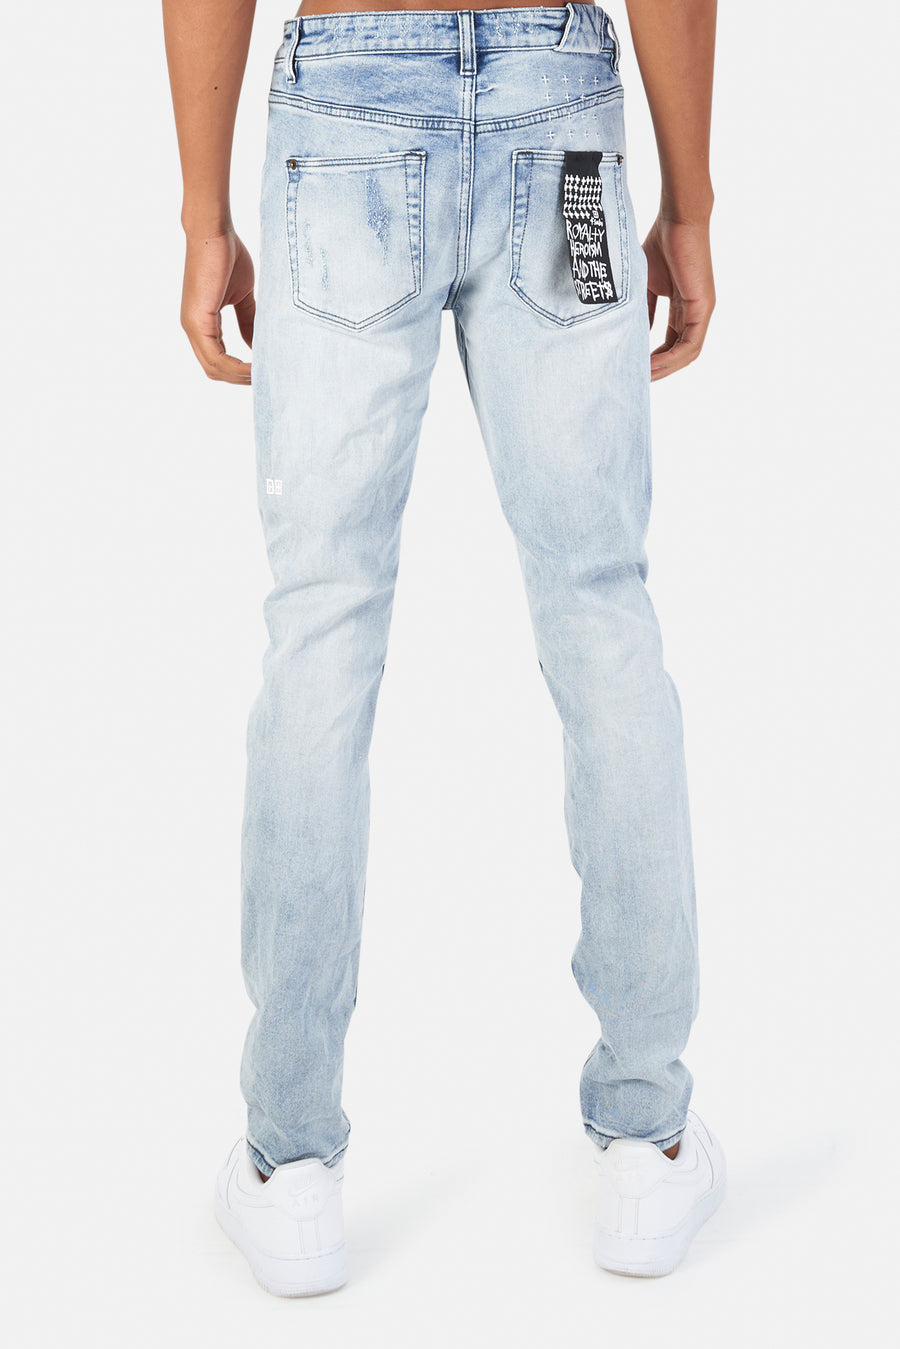 Chitch Jean Philly Blue – blueandcream